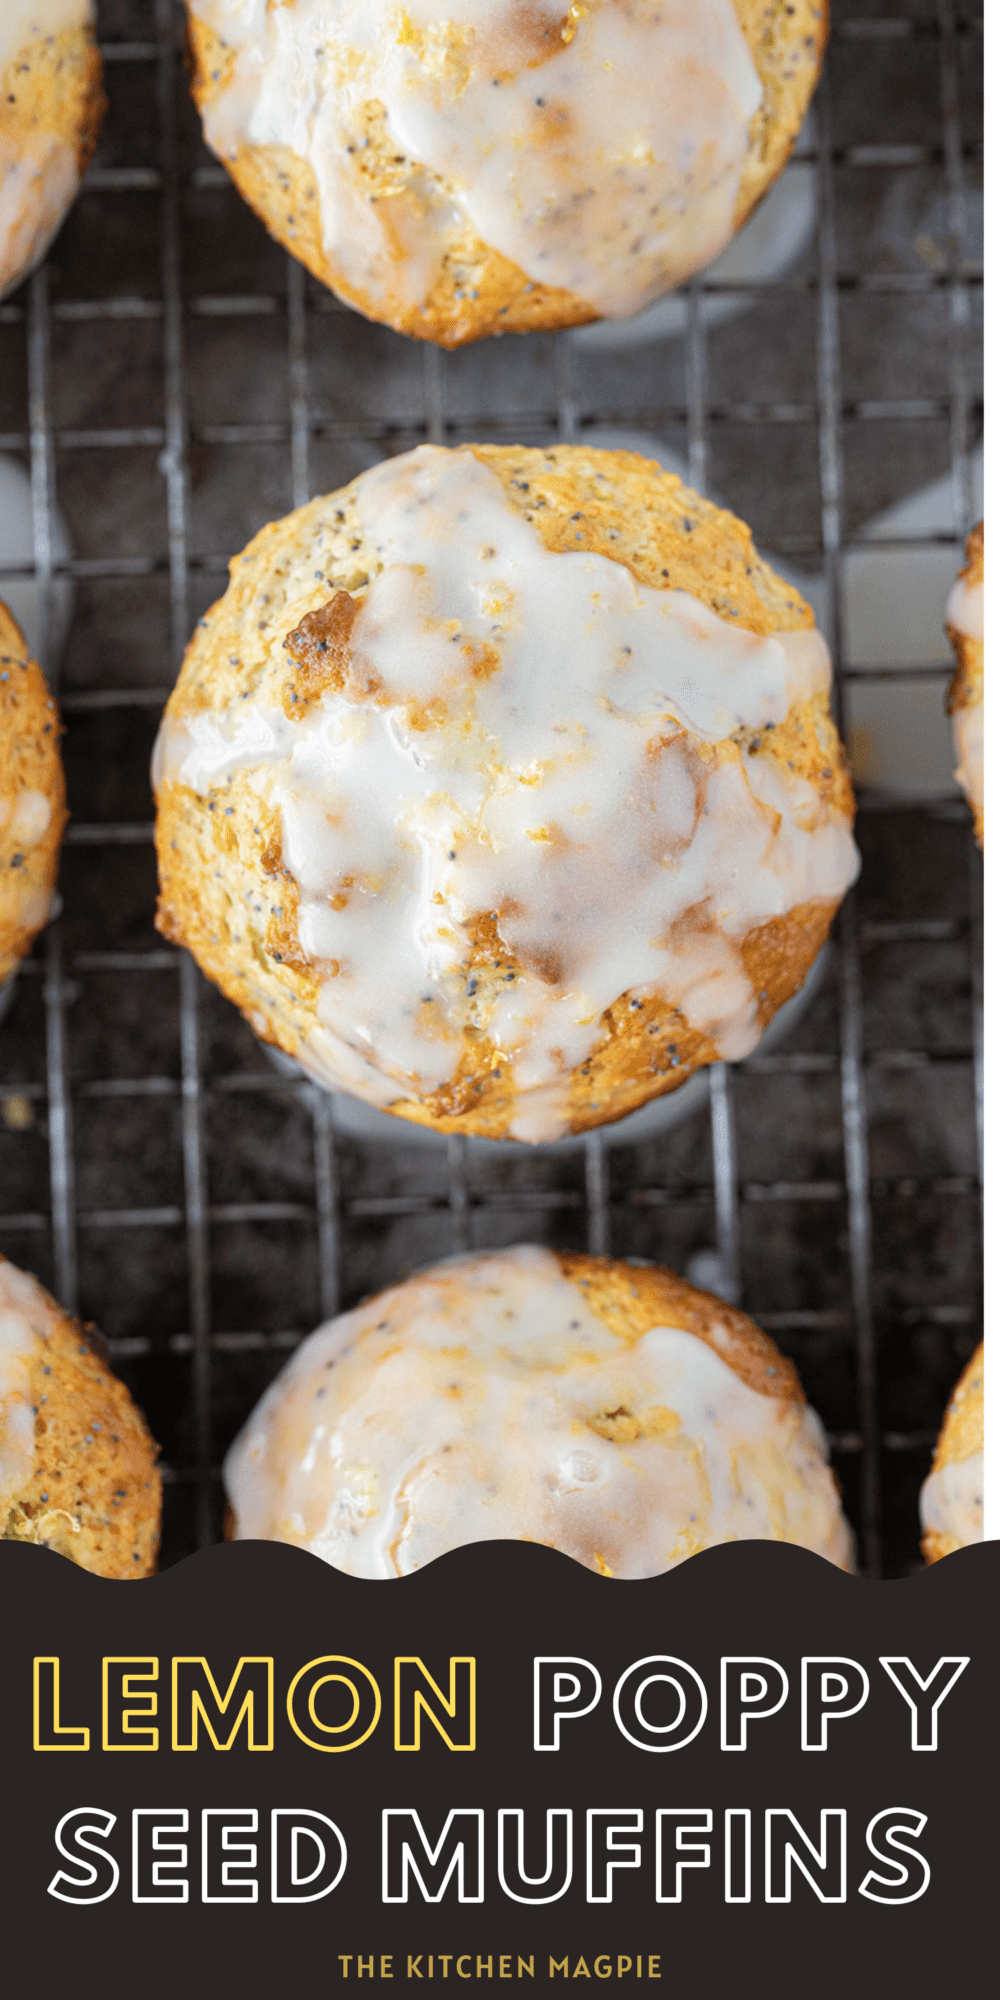 These decadent, flavored loaded lemon poppyseed muffins are the perfect snack or breakfast! Top them with a perfect lemon glaze to really make it a treat!